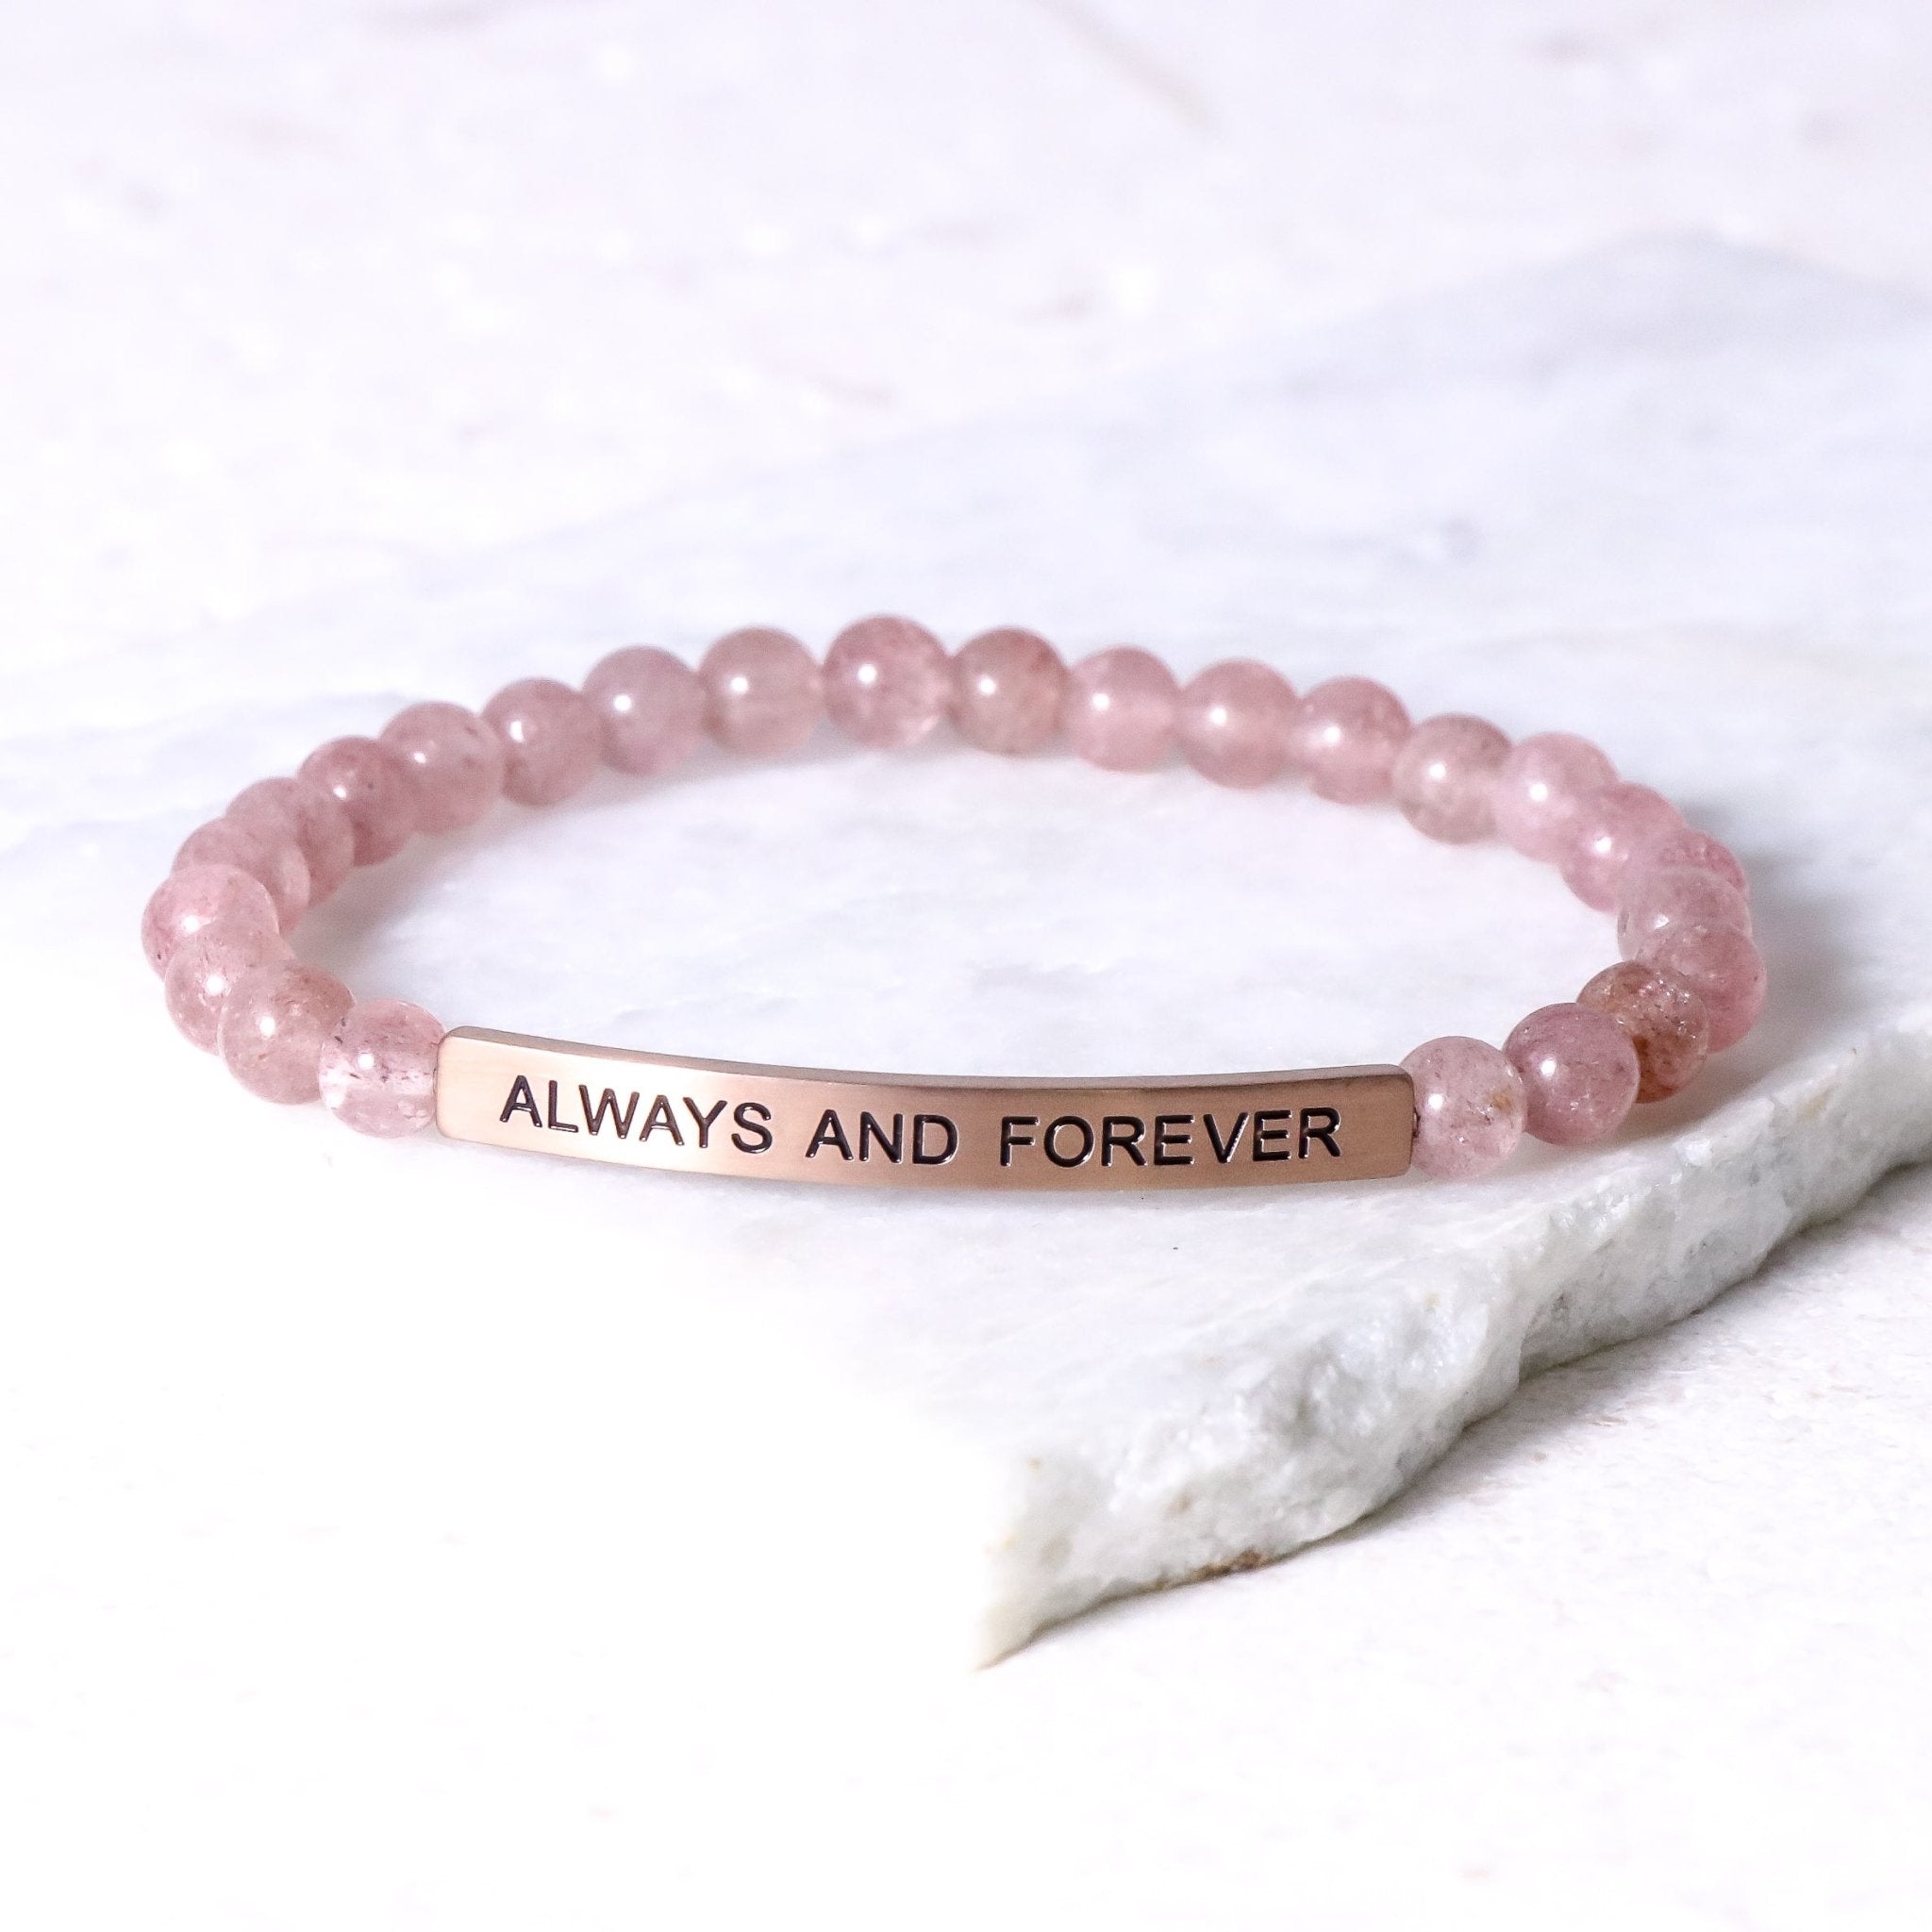 ALWAYS AND FOREVER – Inspiration Co.